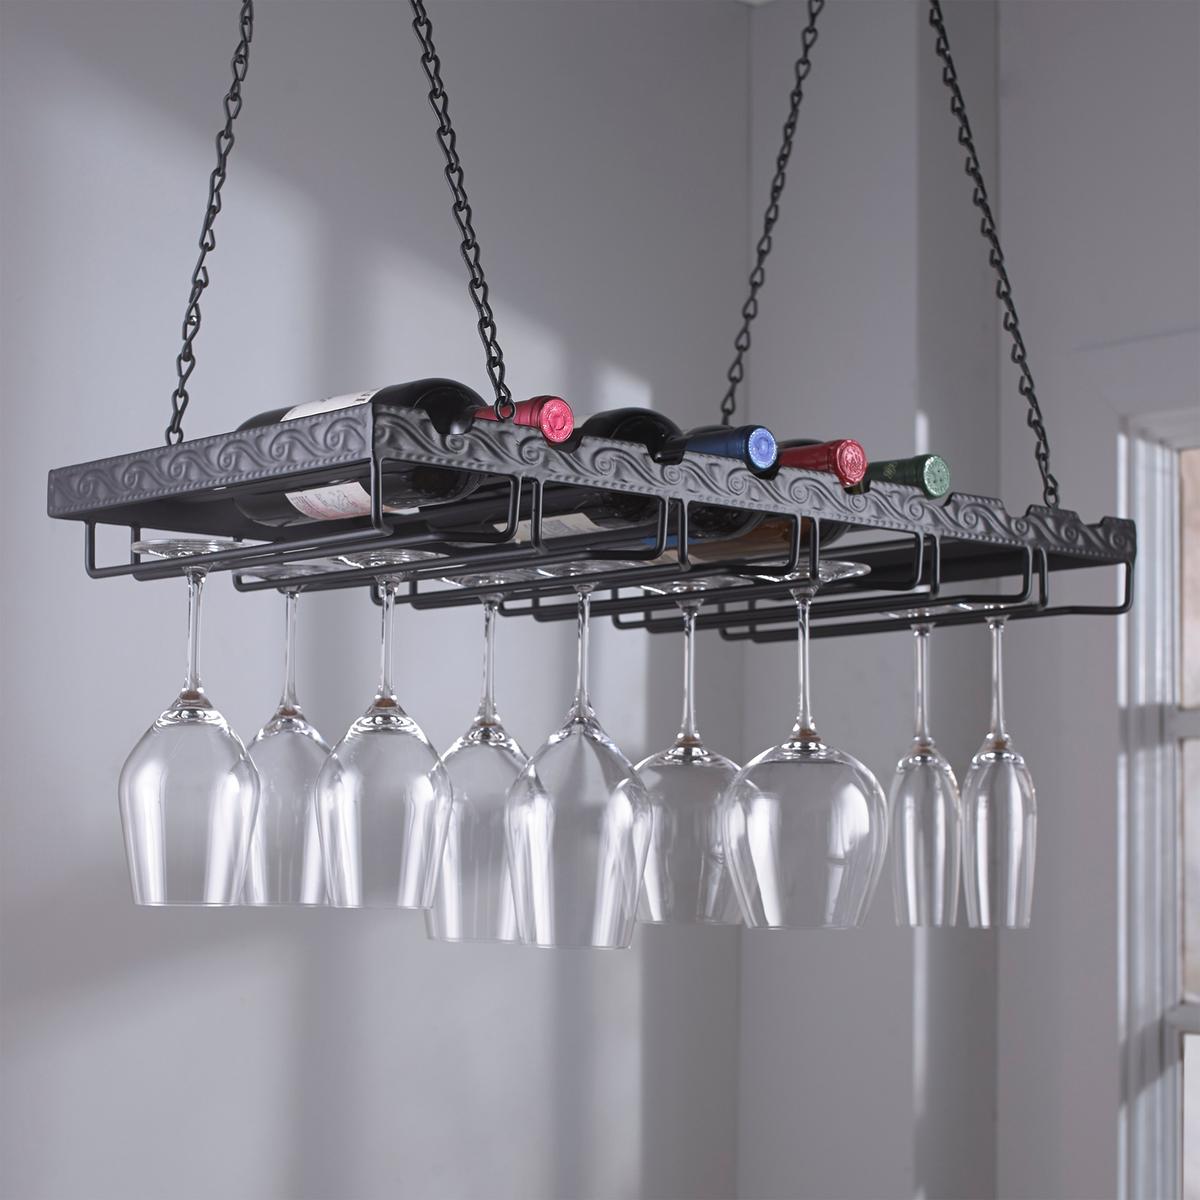 a hanging wine glass rack made of heavy-gauge metal with a powder coat to protect against rust securely suspends from steel chains